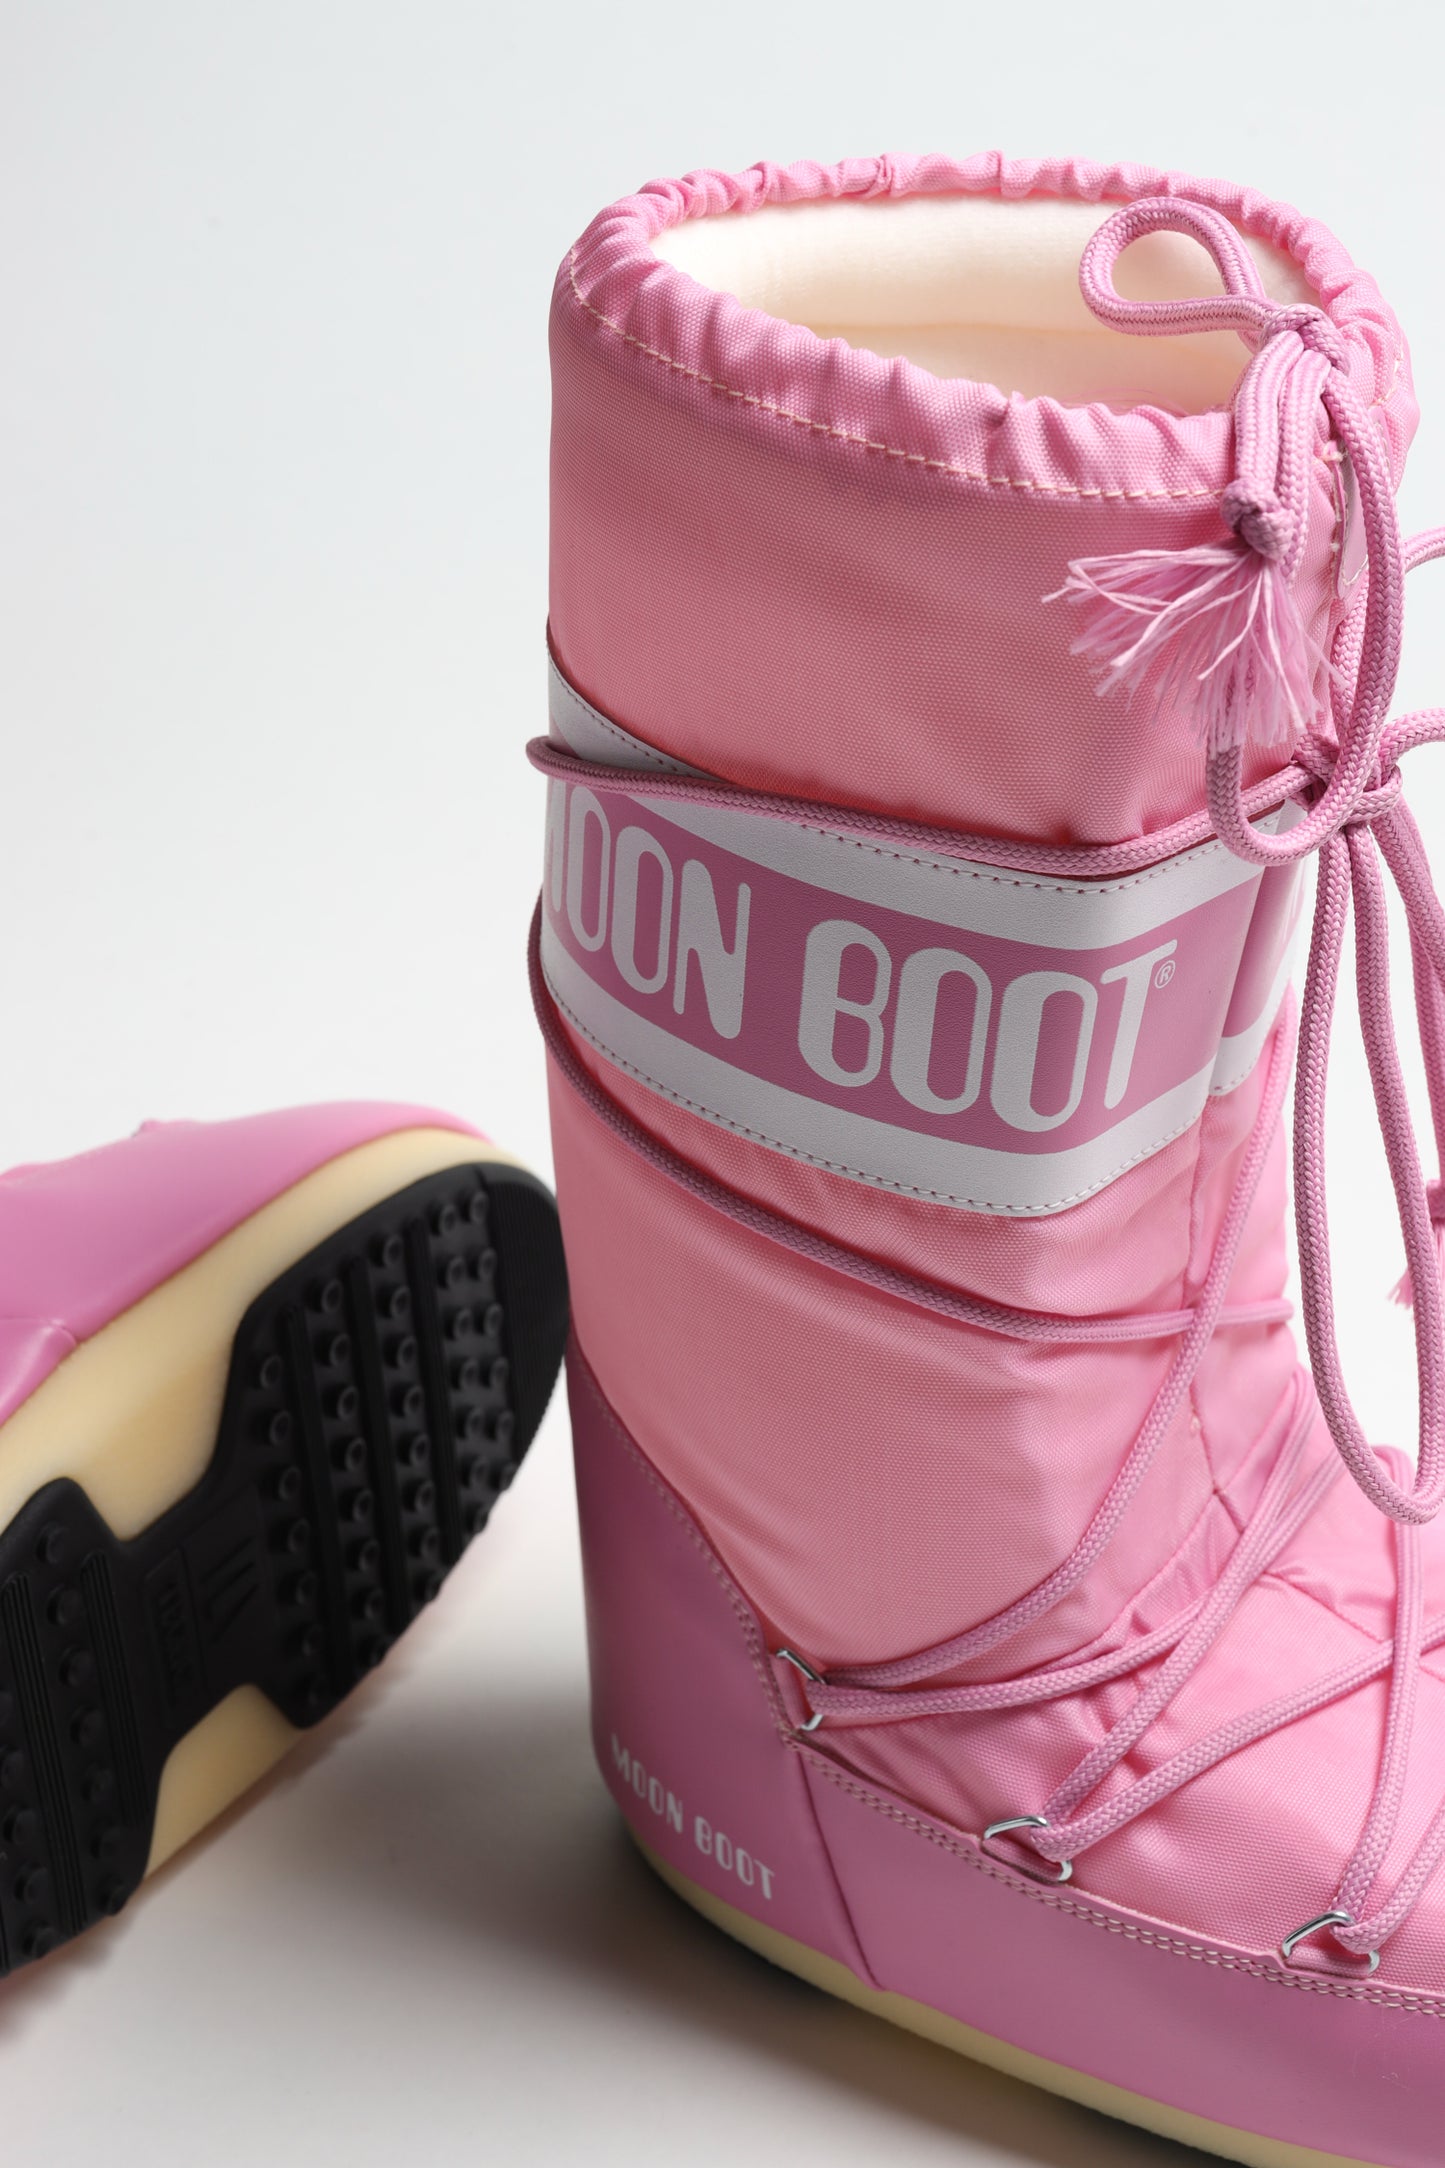 Moon Boot Icon in PinkMoon Boot - Anita Hass